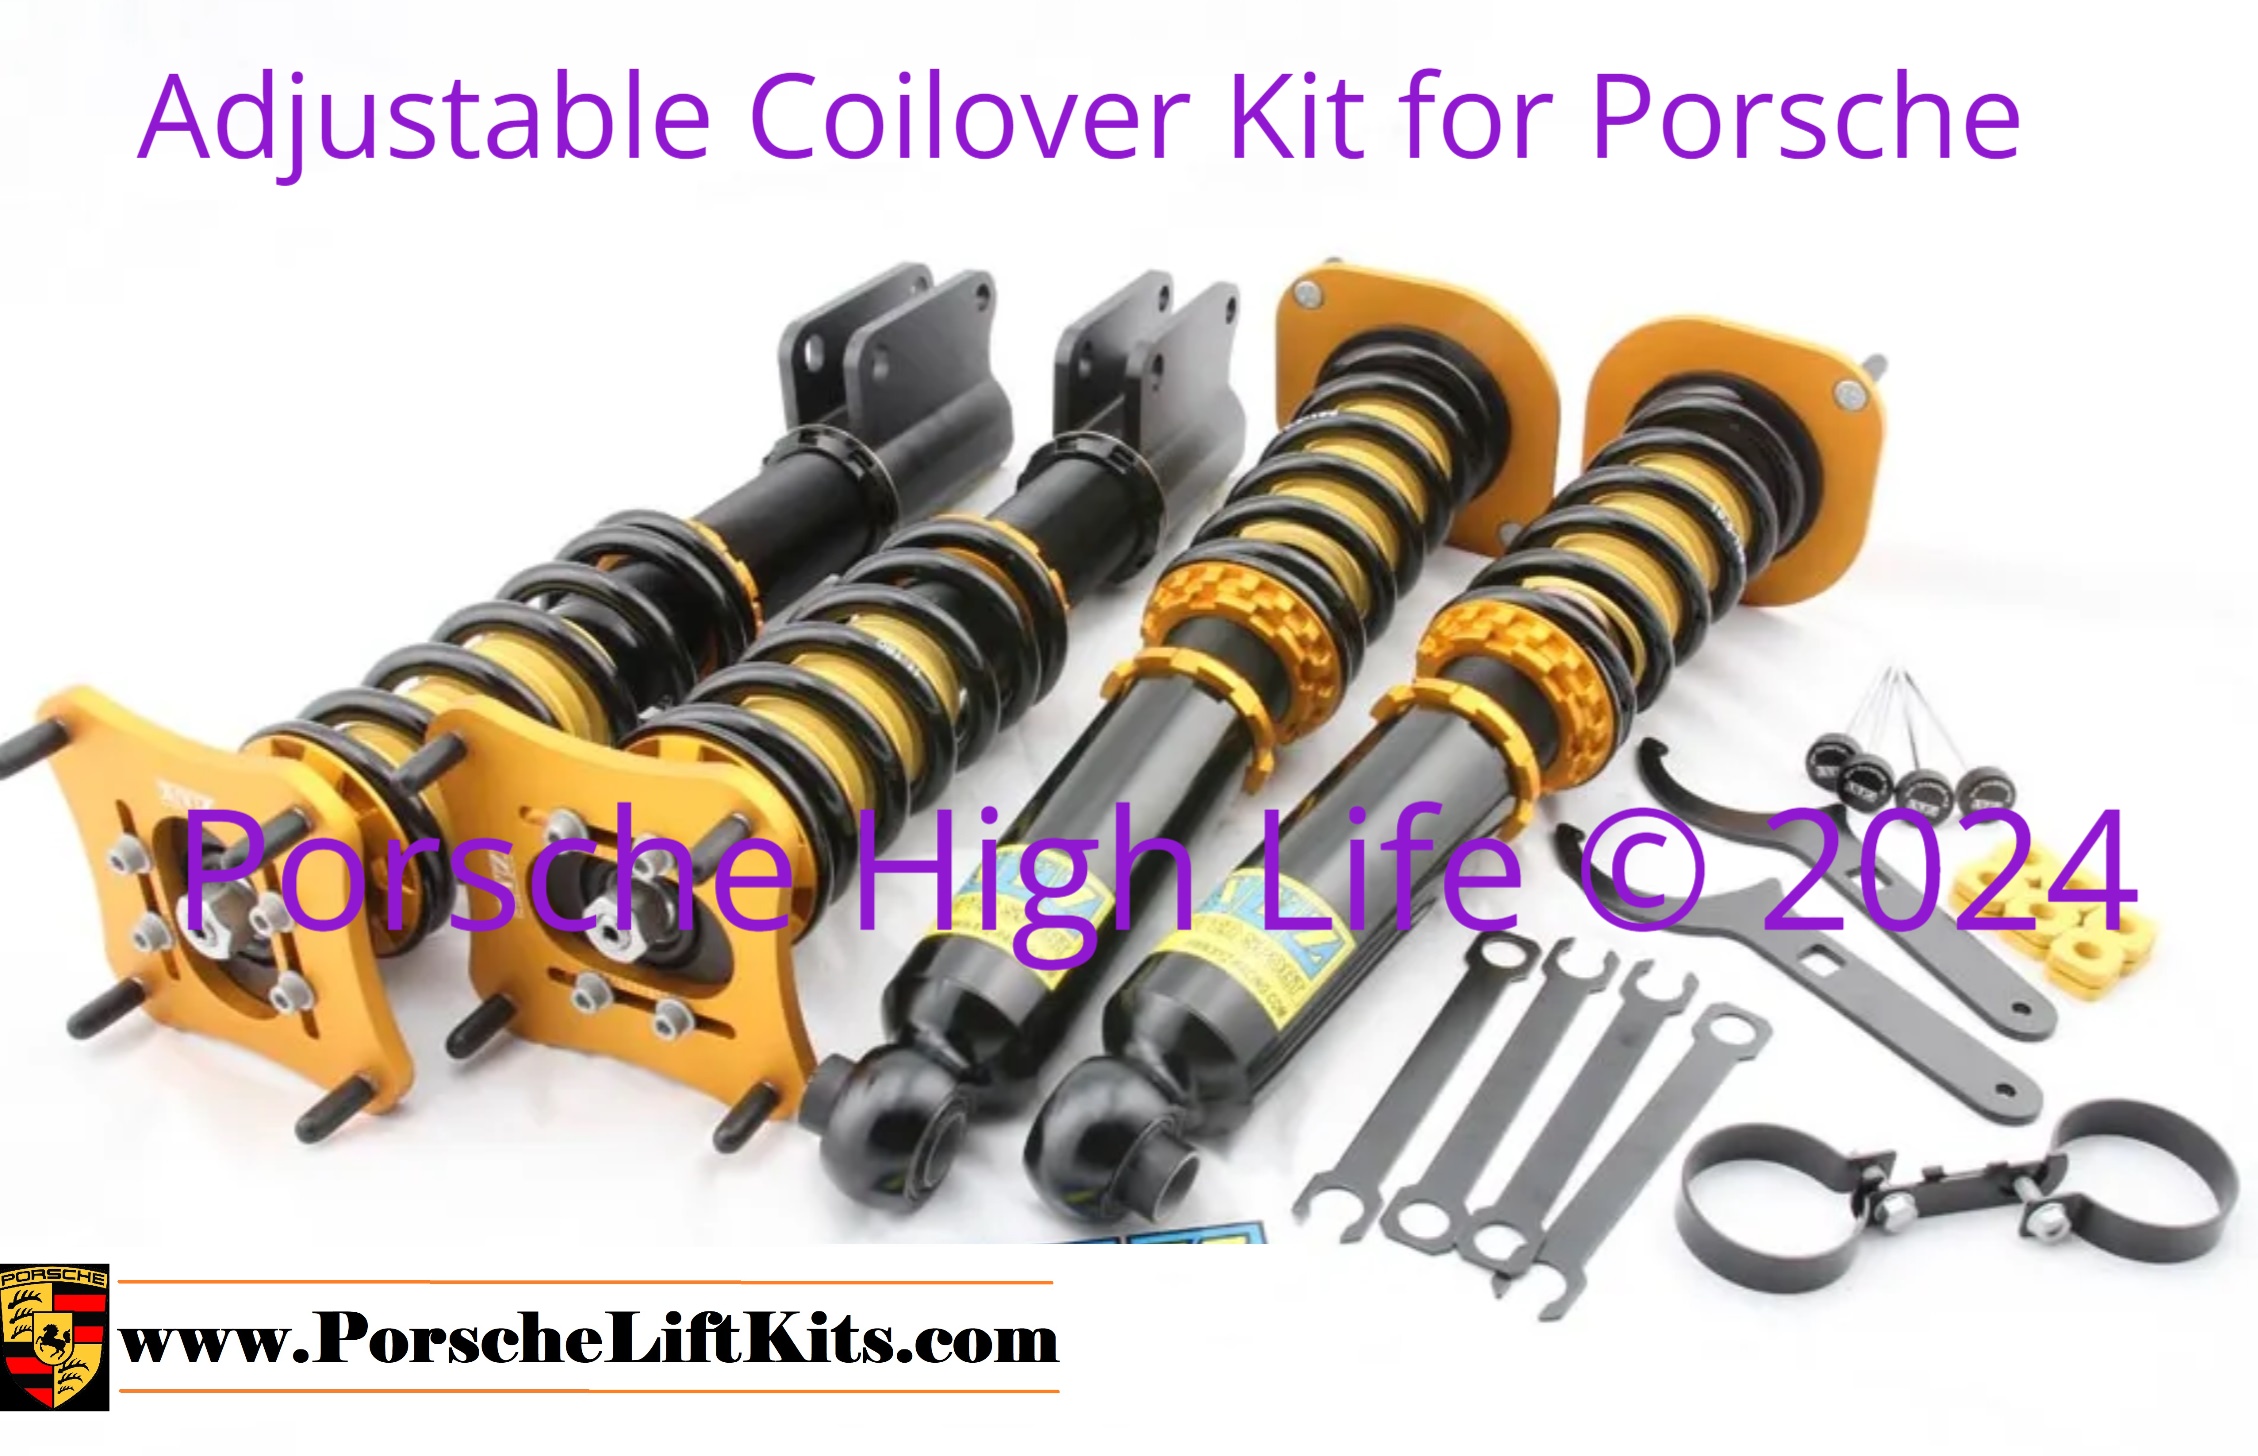 Coilover Suspension with 45mm piston with adjustable 30-way dampening settings. Available for Porsche Carrera 964, 993, 996, 996 GT3, 997, Boxster 996, Cayman 987, and, Panamera